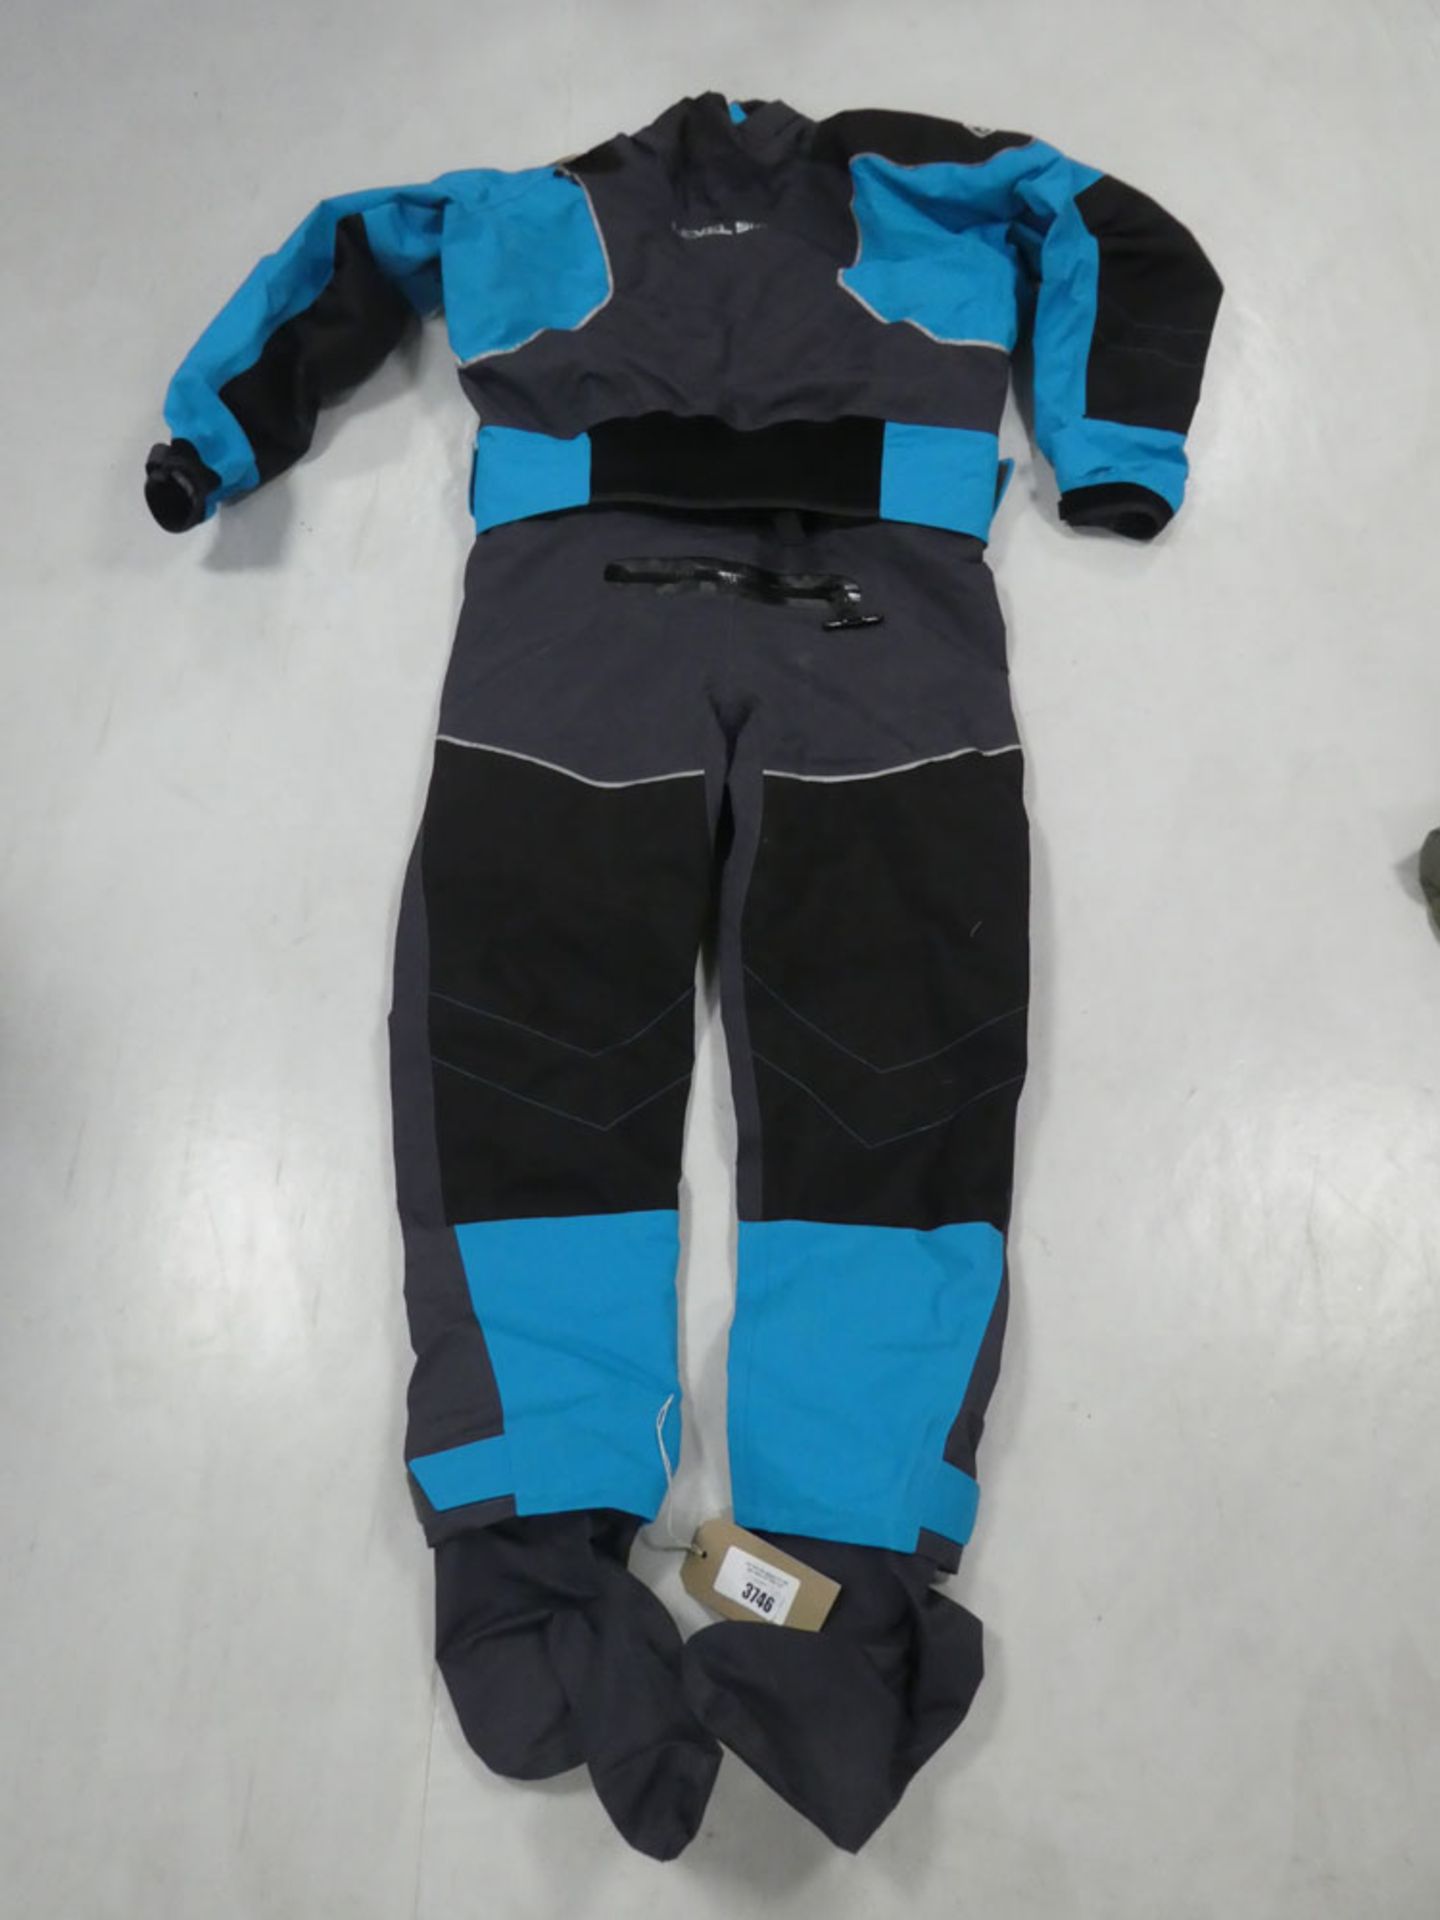 Level 6 Emperor Drysuit size XL in charcoal and blue (bagged)